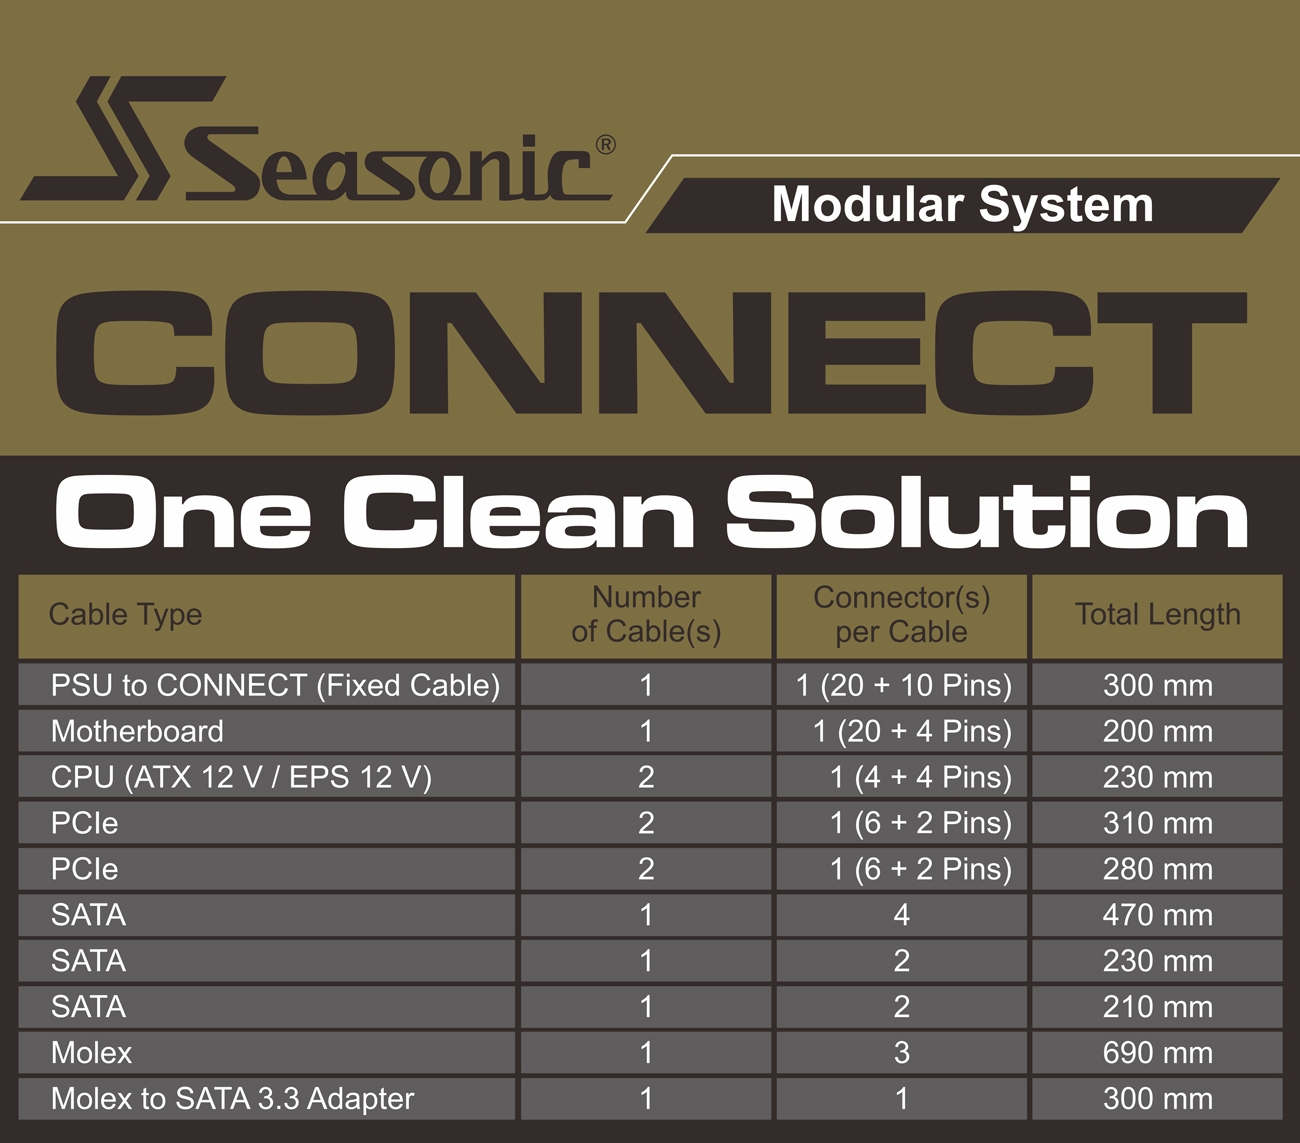 Modular System Specifications